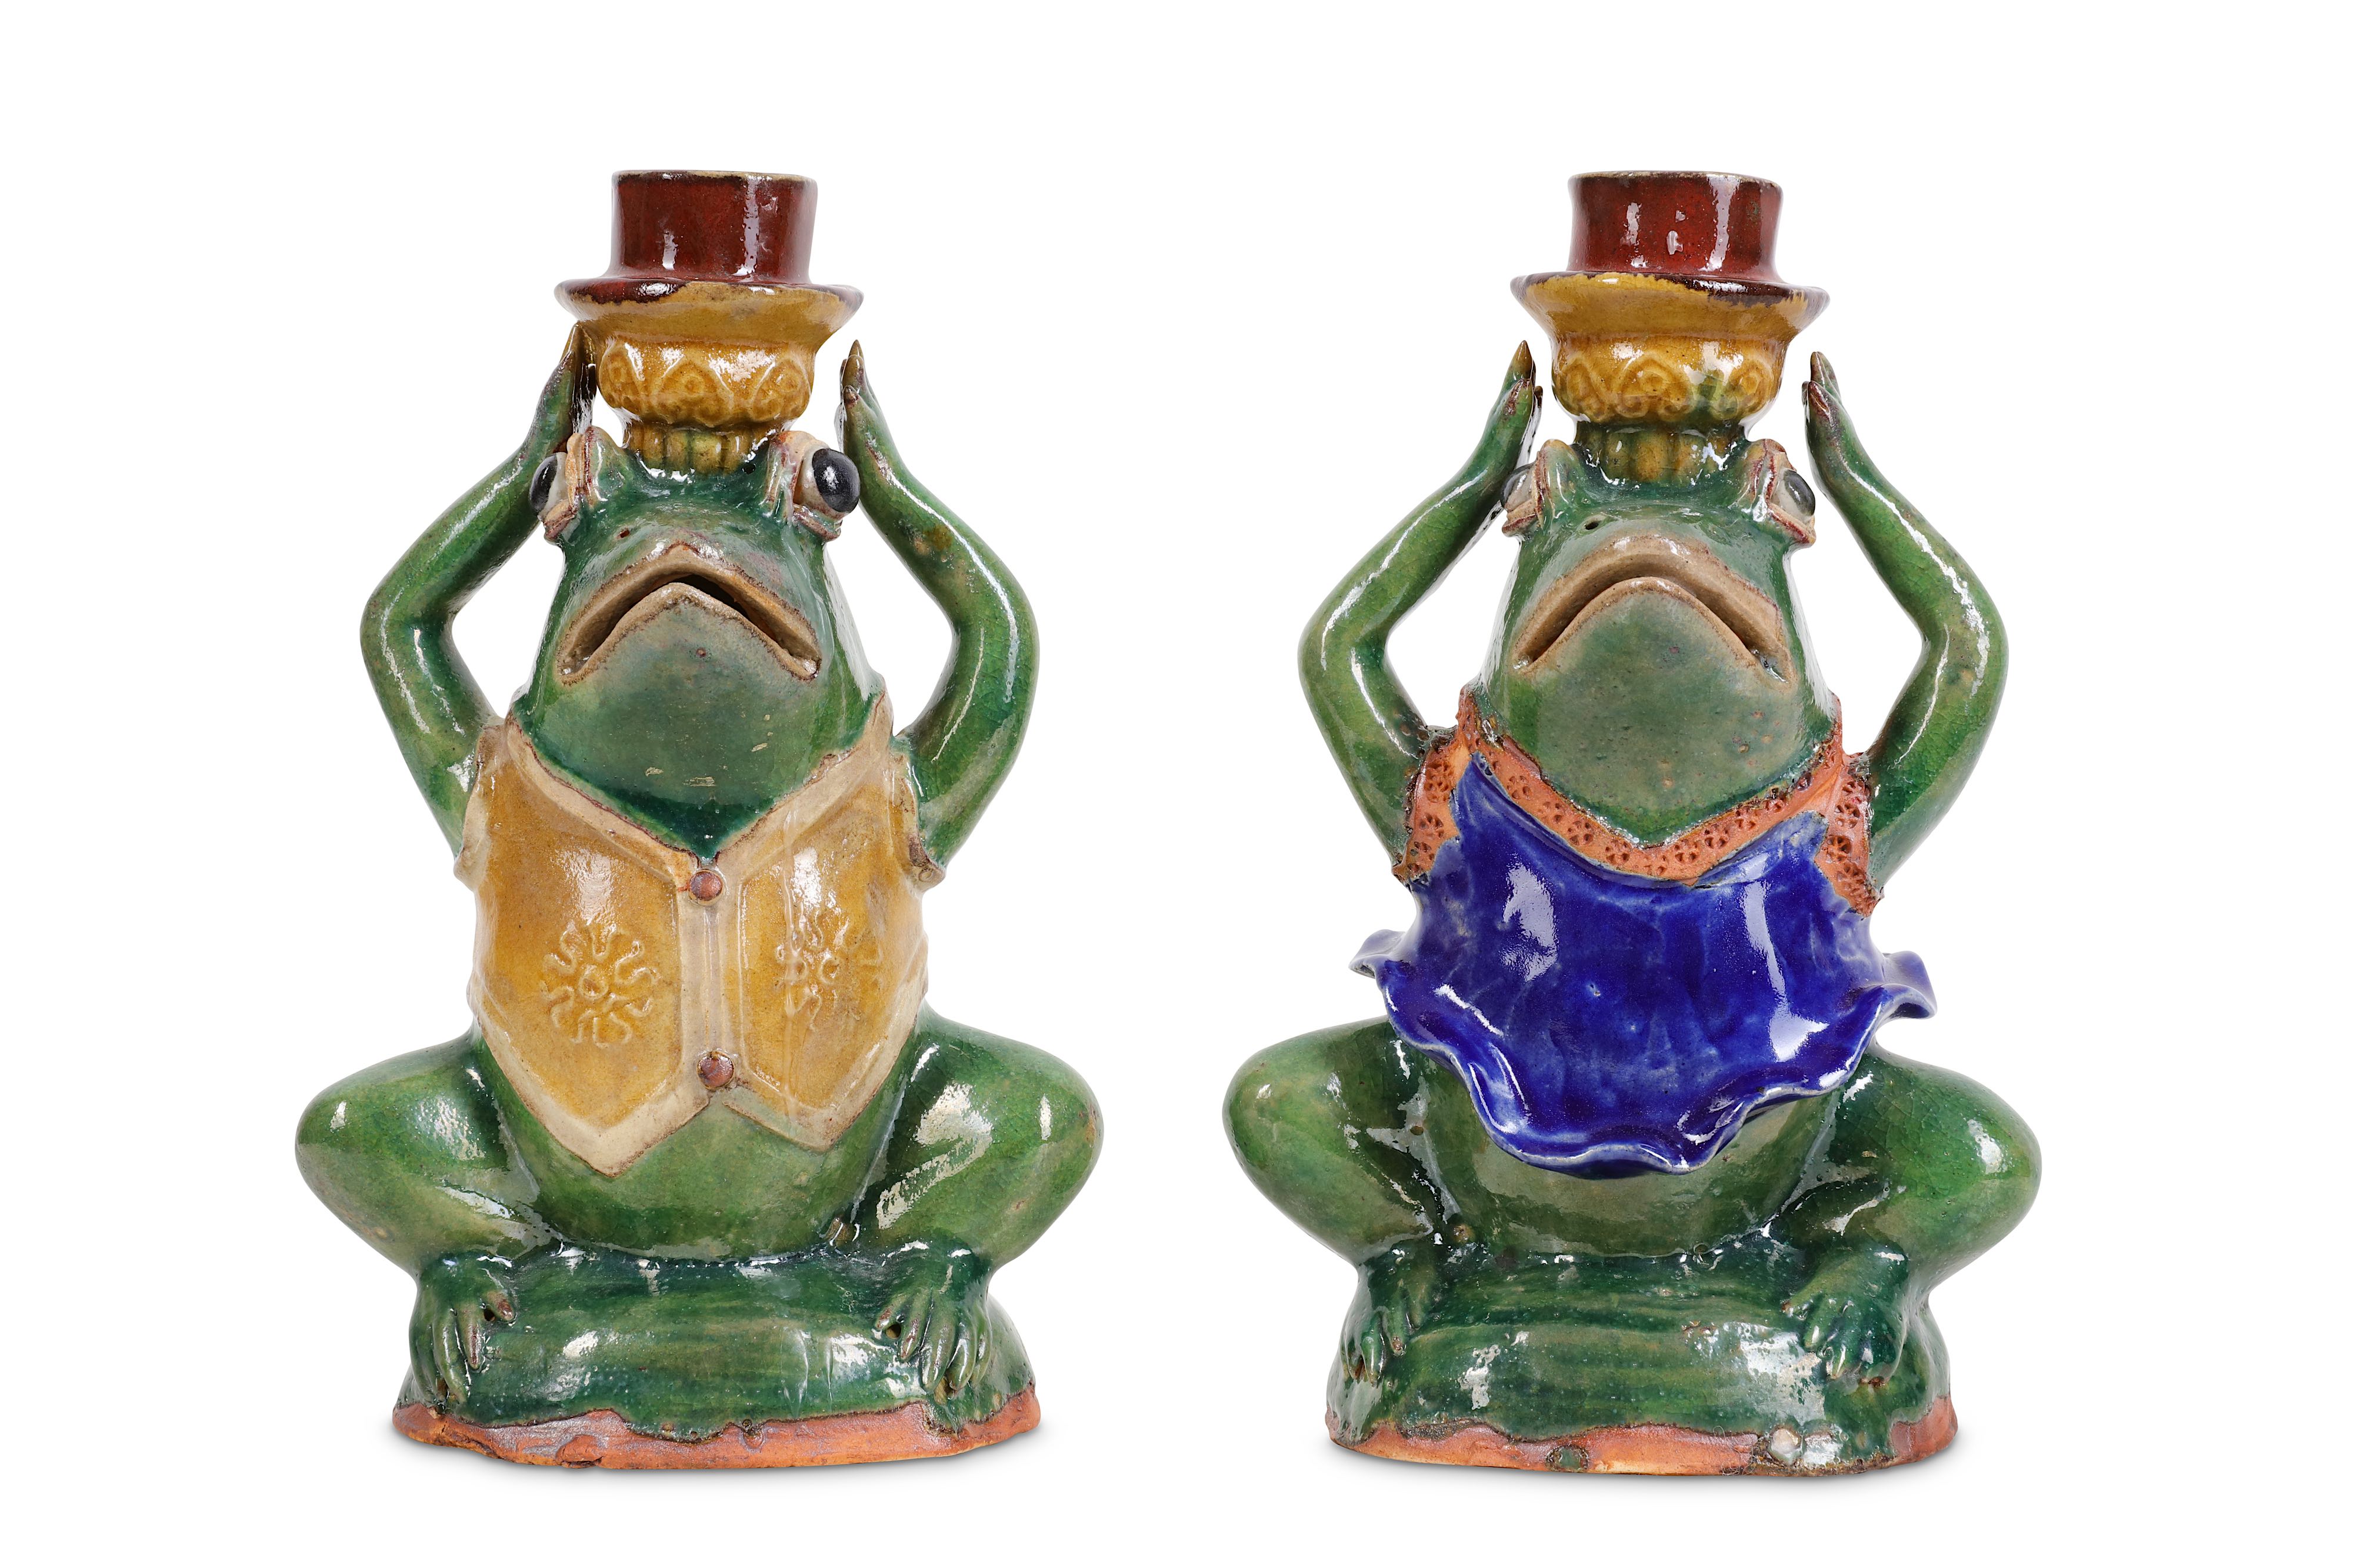 A PAIR OF 20TH CENTURY JAPANESE GLAZED CERAMIC CANDLESTICKS MODELLED AS FROGS